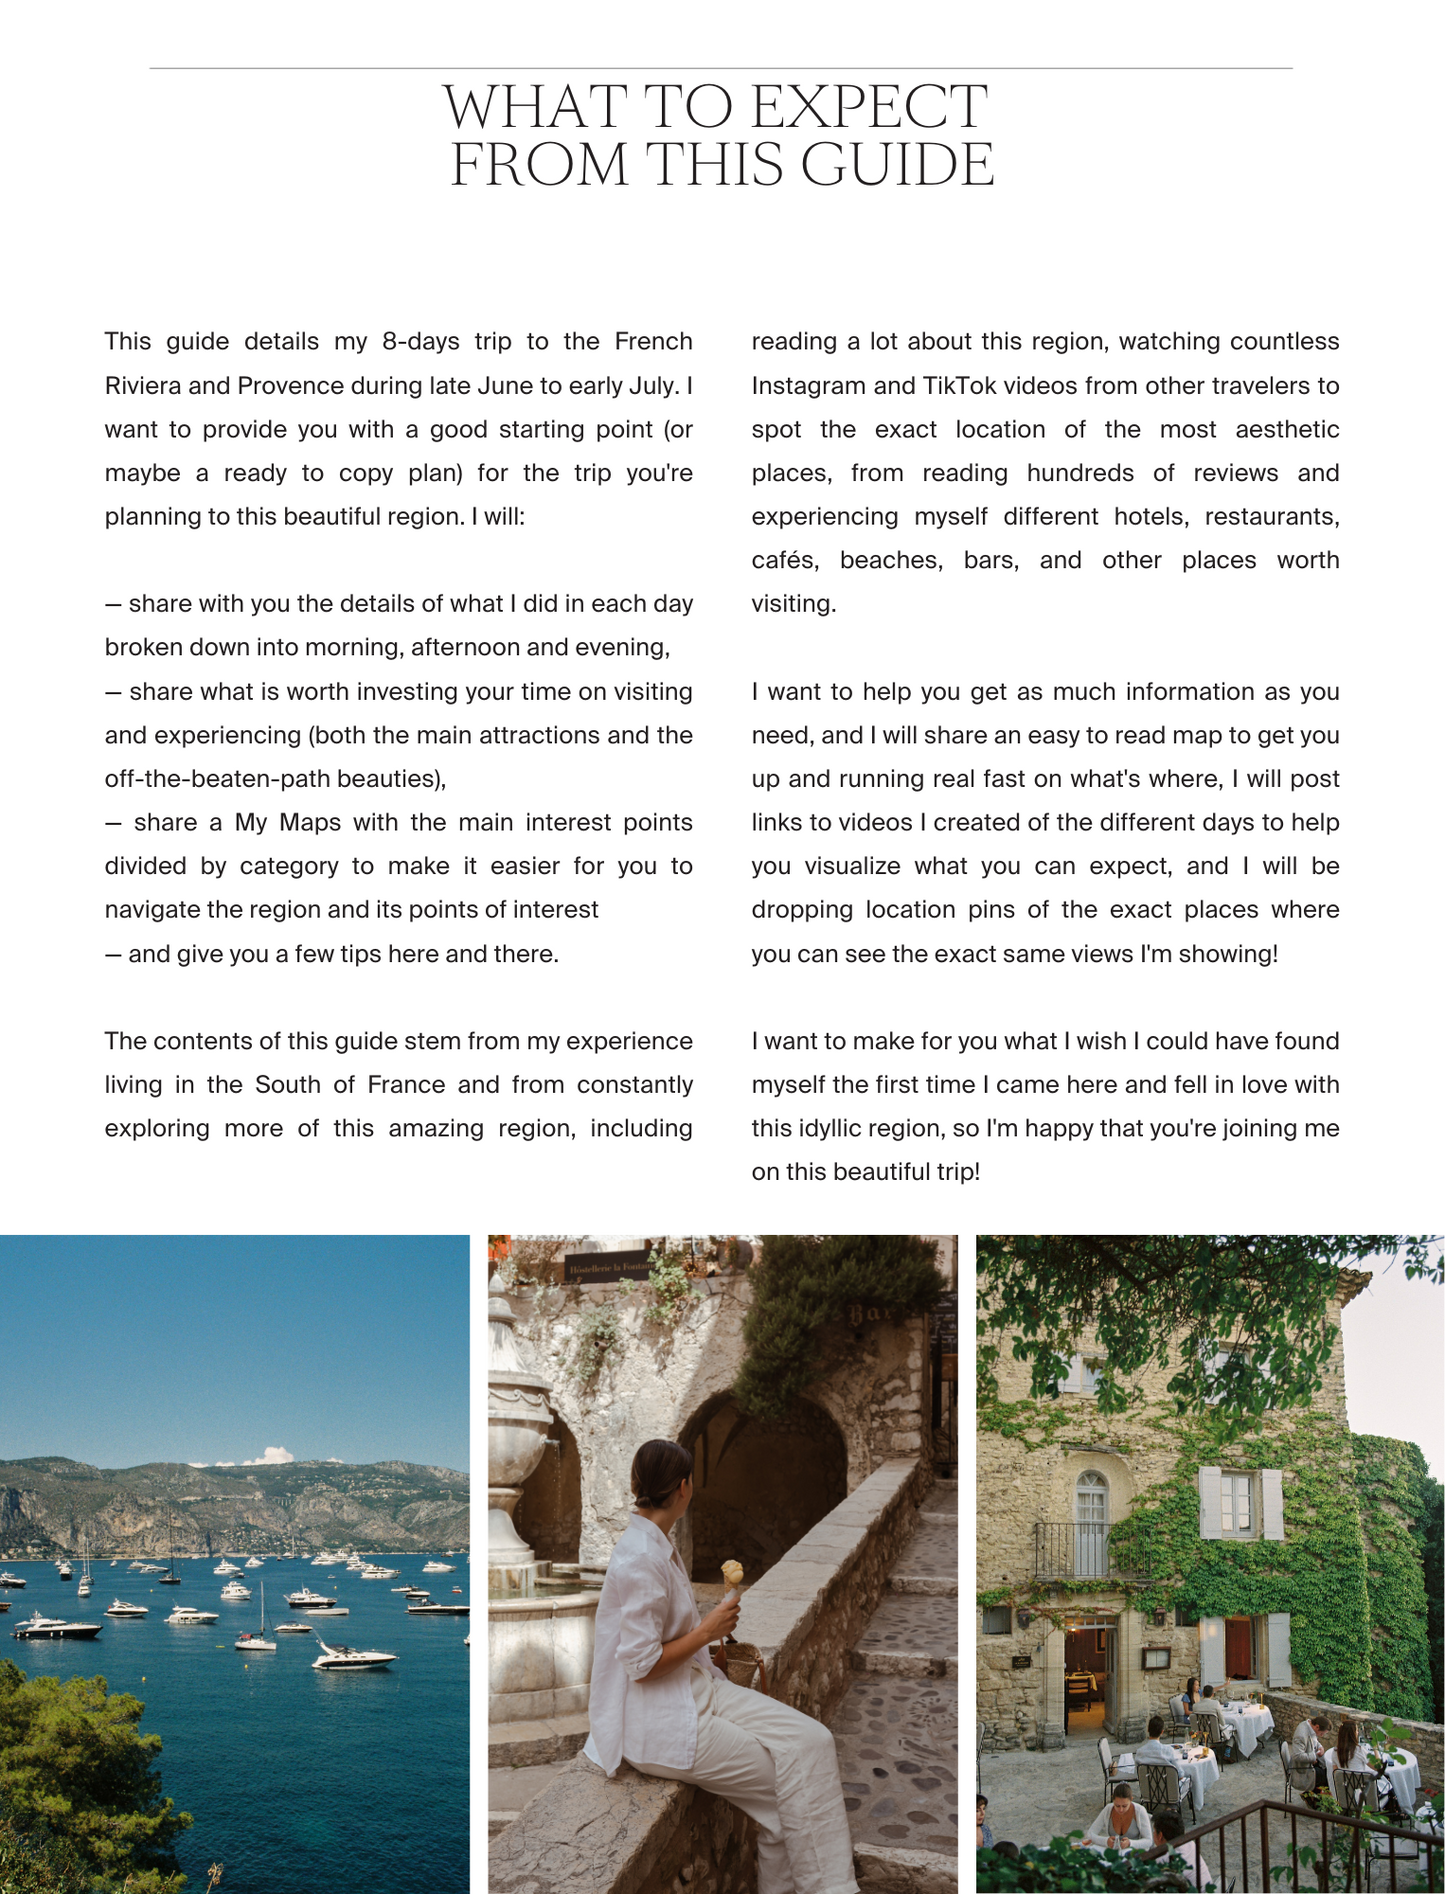 A Guide to the French Riviera & Provence - the 'What to Expect' page, by Simply Slow Traveler